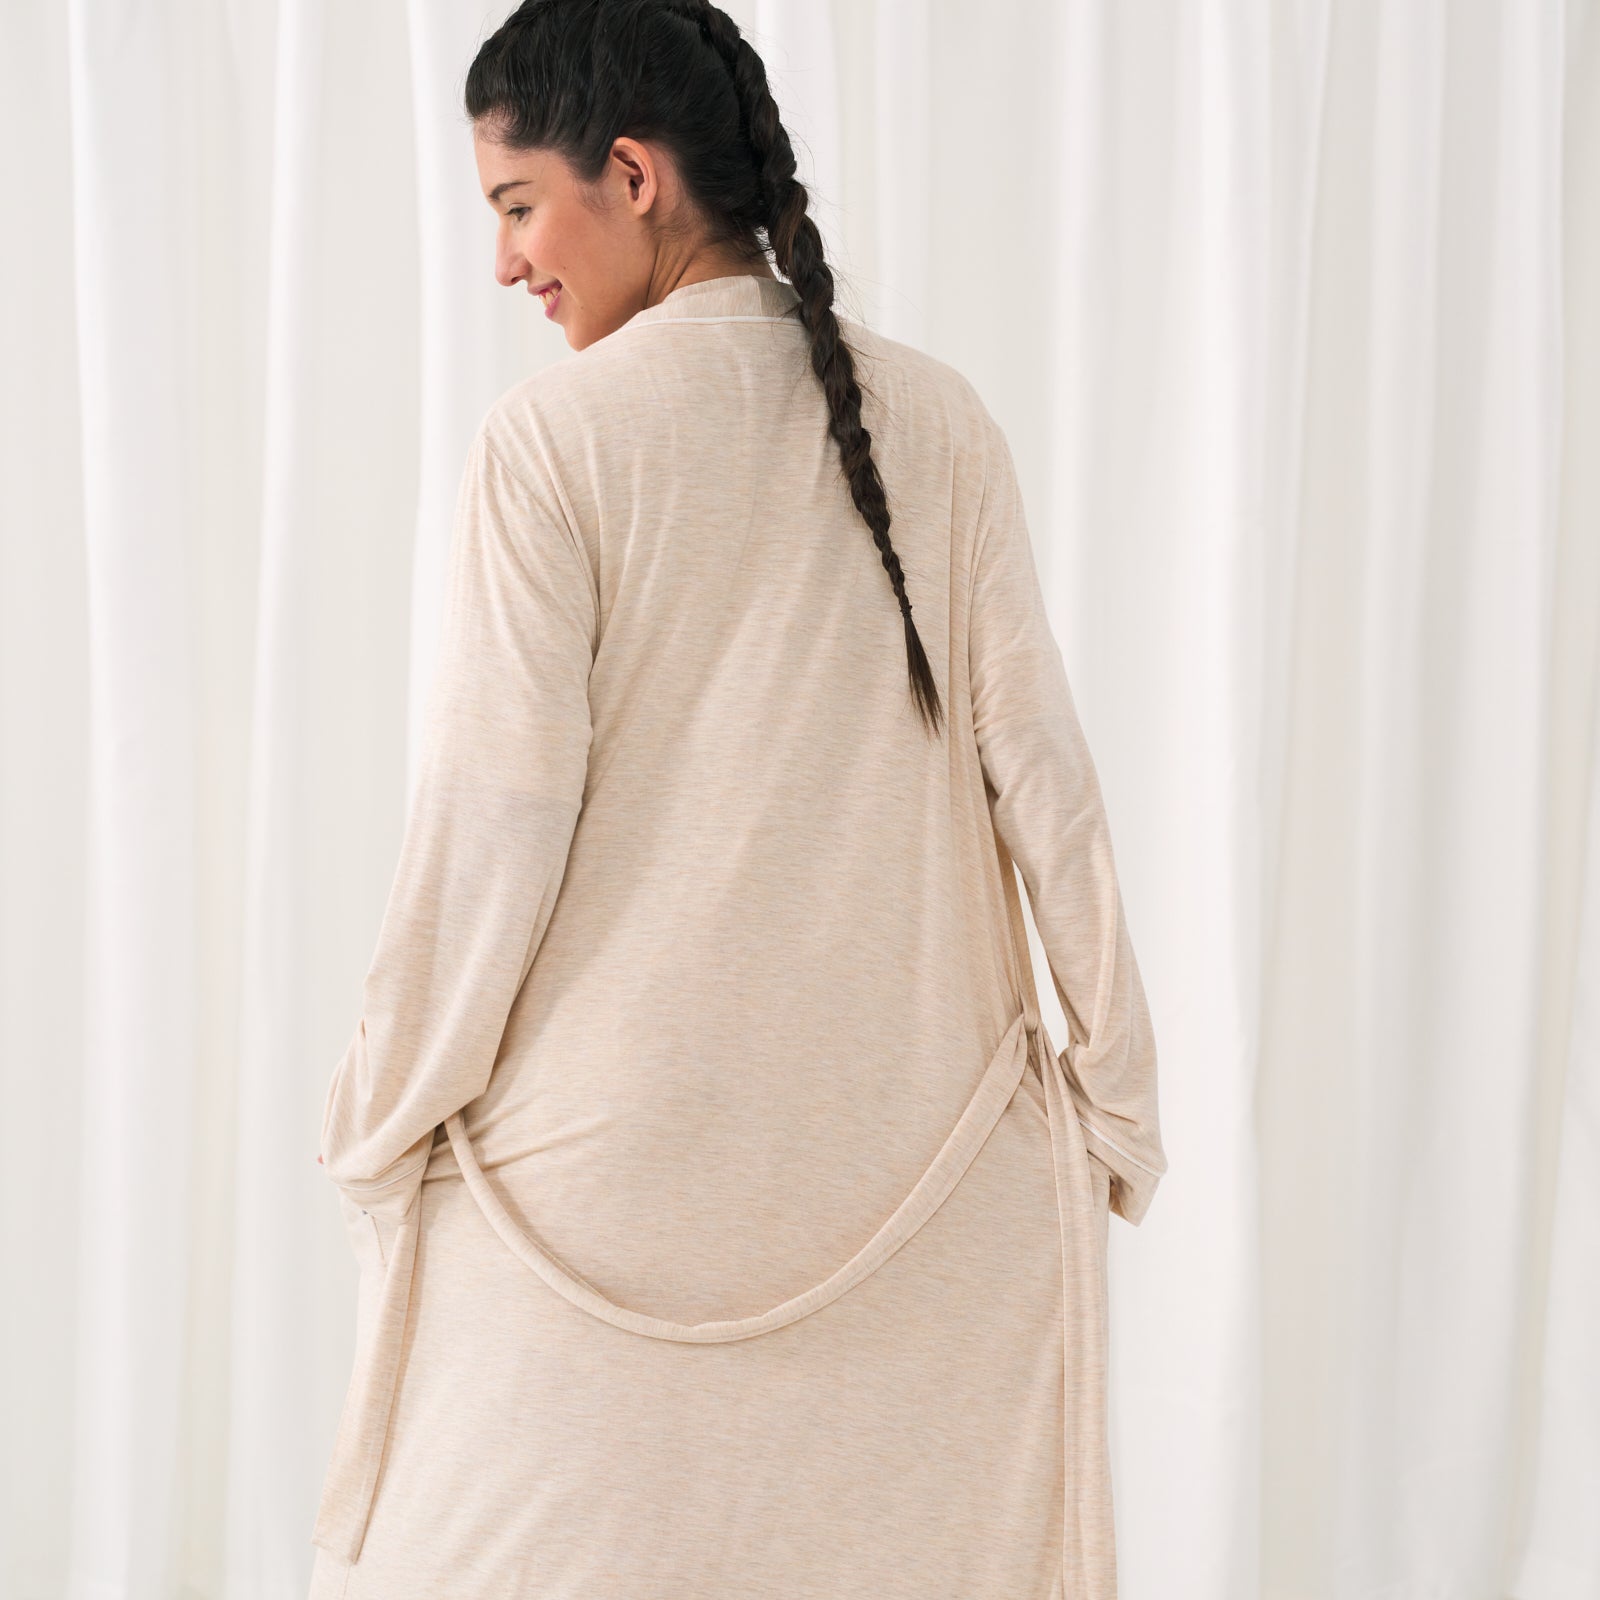 Back view of a woman wearing a Heather Oatmeal Women's Robe showing off the removable tie